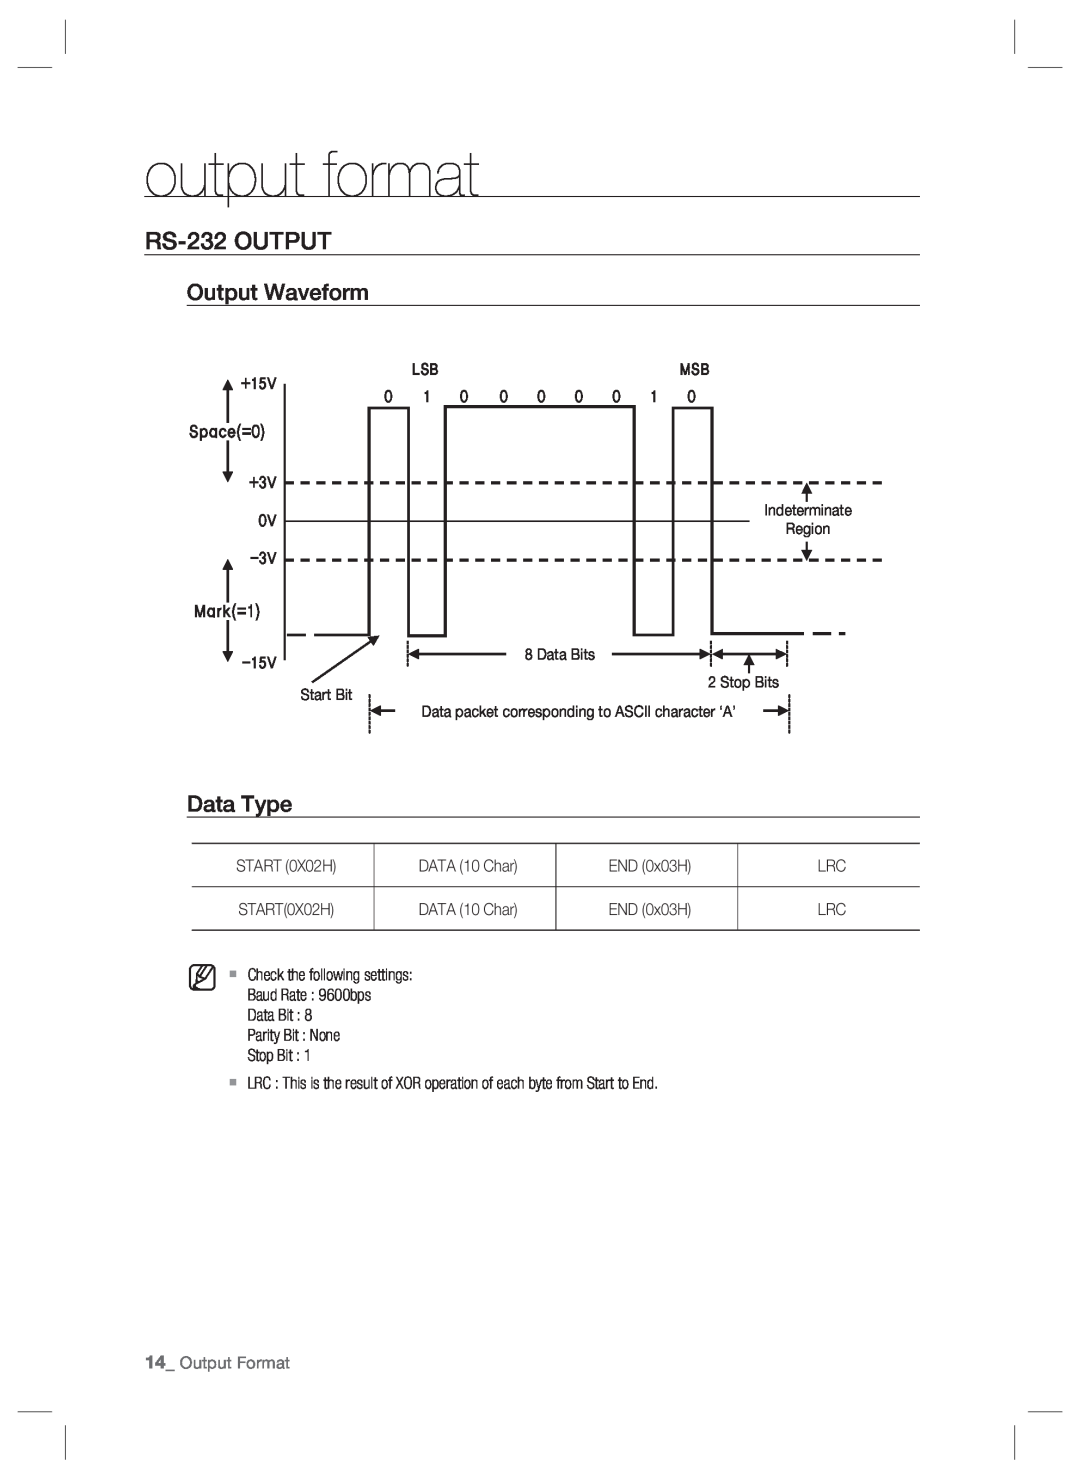 Samsung SSA-R2001 user manual RS-232OUTPUT, Output Waveform, Data Type, output format, Output Format 